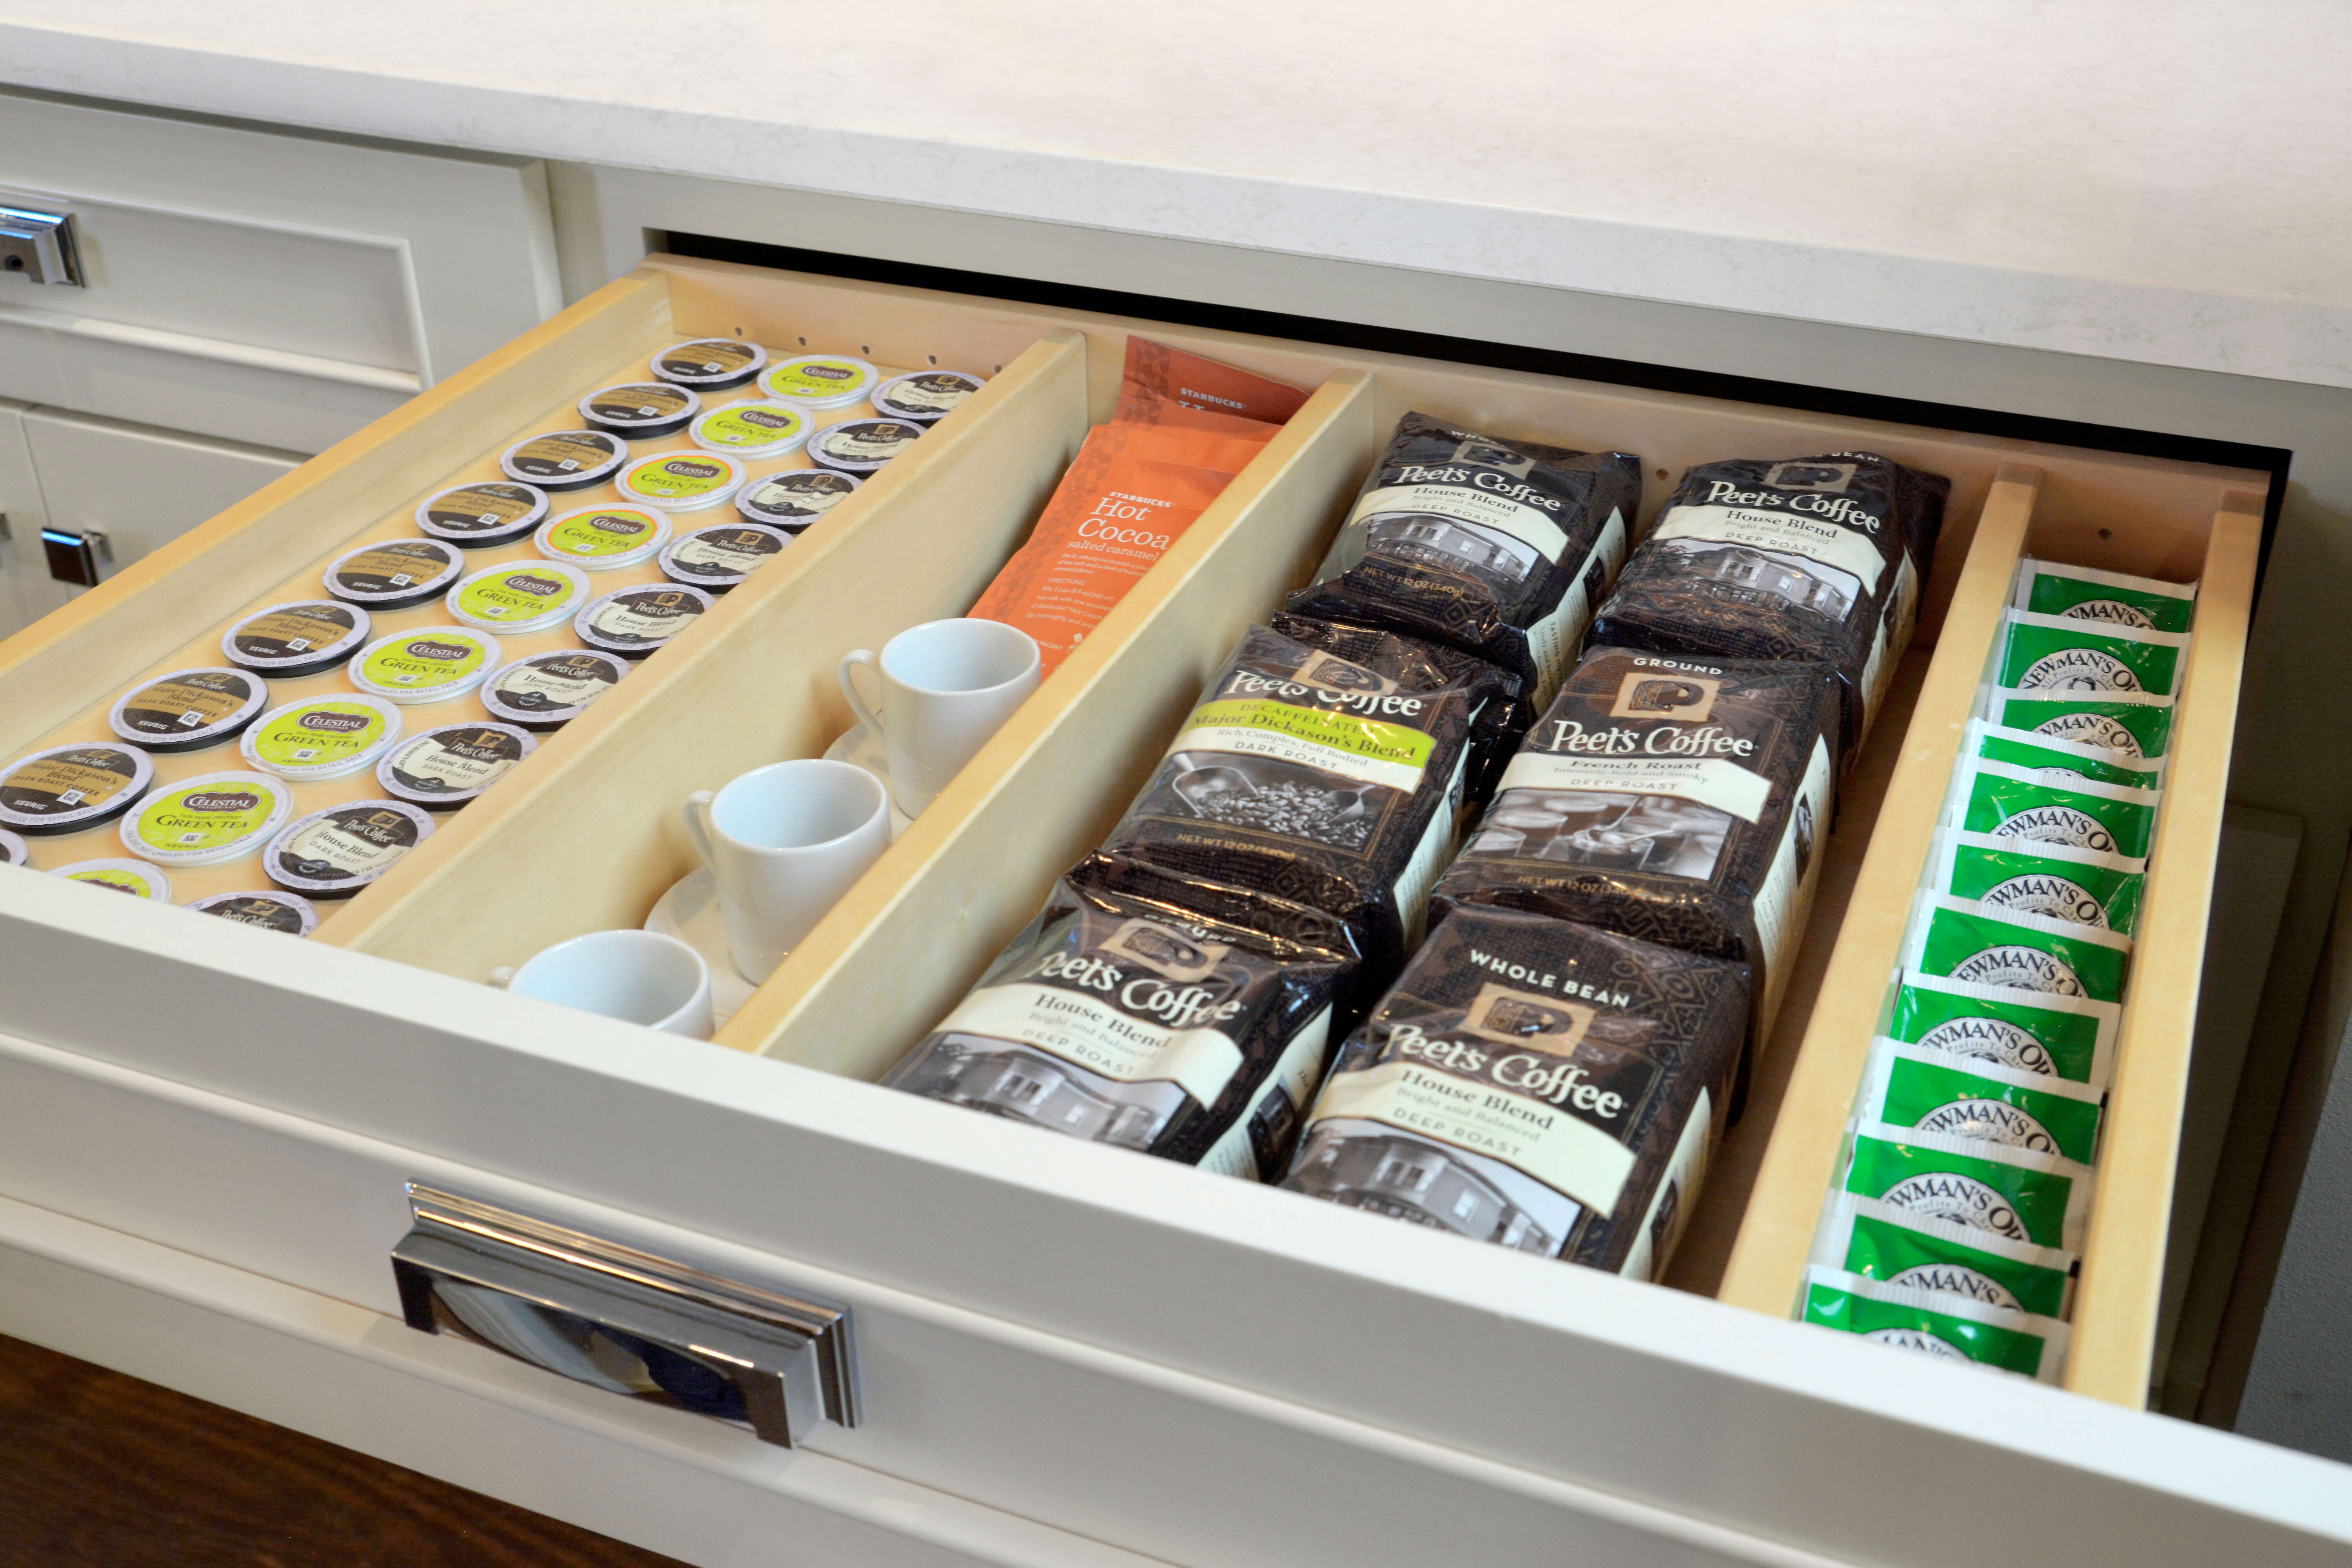 How to Organize Bathroom Drawers - Dura Supreme Cabinetry